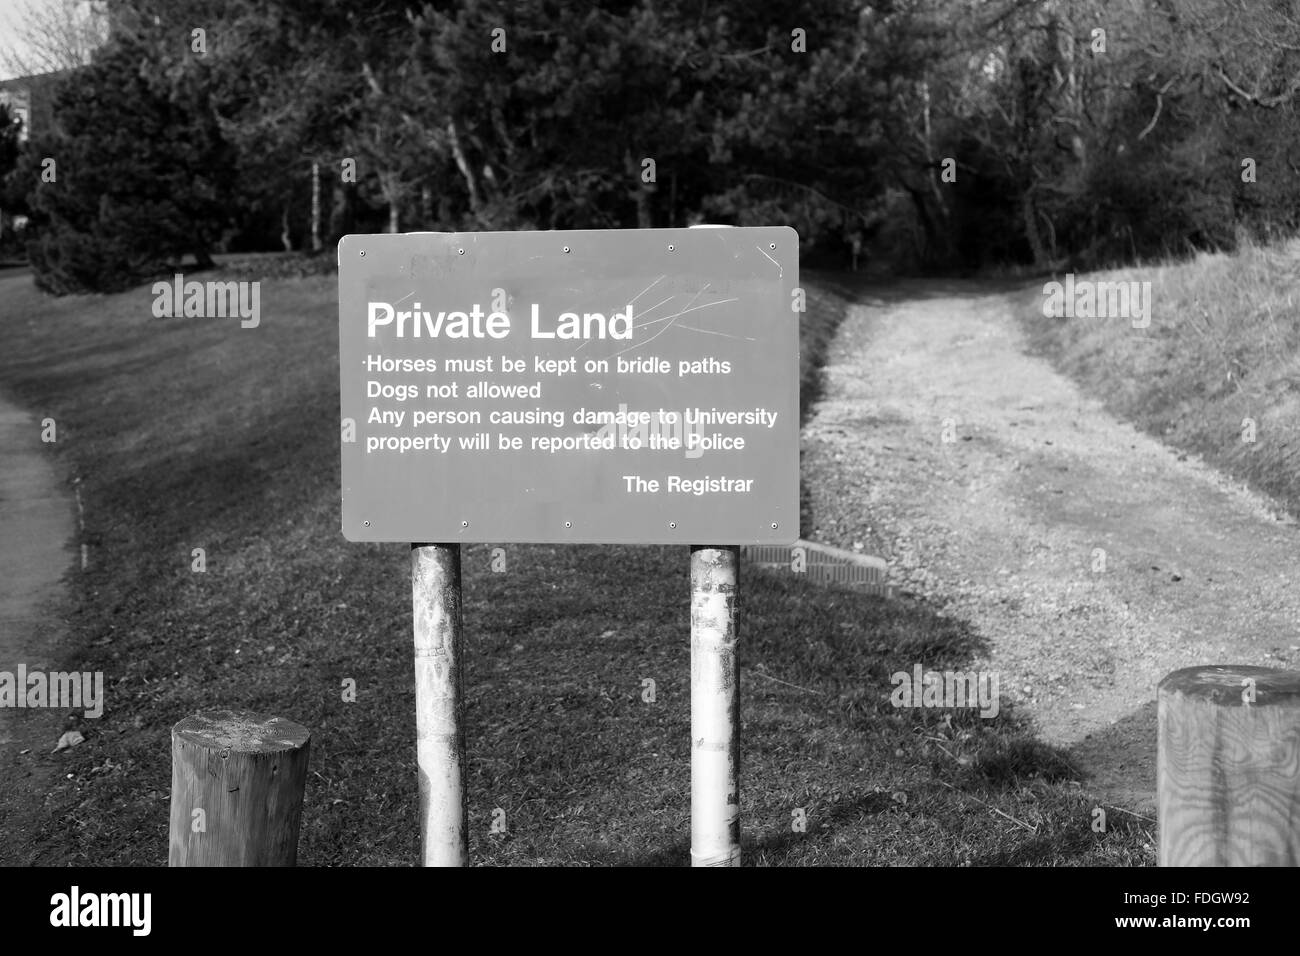 Private land sign, horses kept to bridle paths, Dogs not allowed  January 2016 Stock Photo